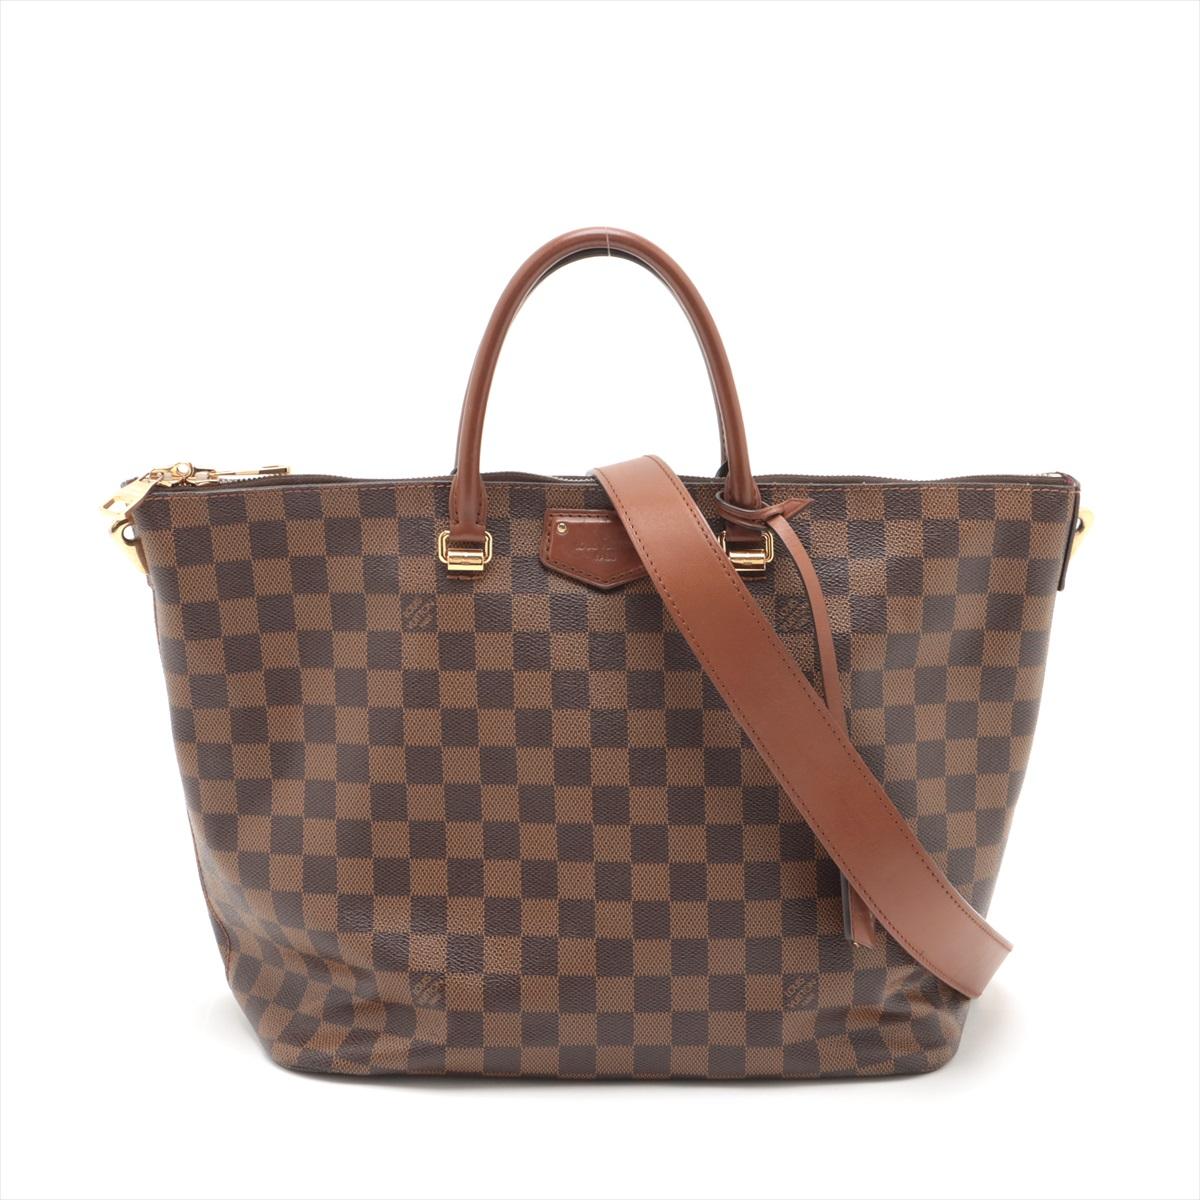 The Louis Vuitton Damier Ebene Belmont is a sophisticated and practical tote bag designed for everyday elegance. Crafted from the brand's iconic Damier Ebene canvas, the tote exudes luxury and timeless style. Its structured silhouette is accented